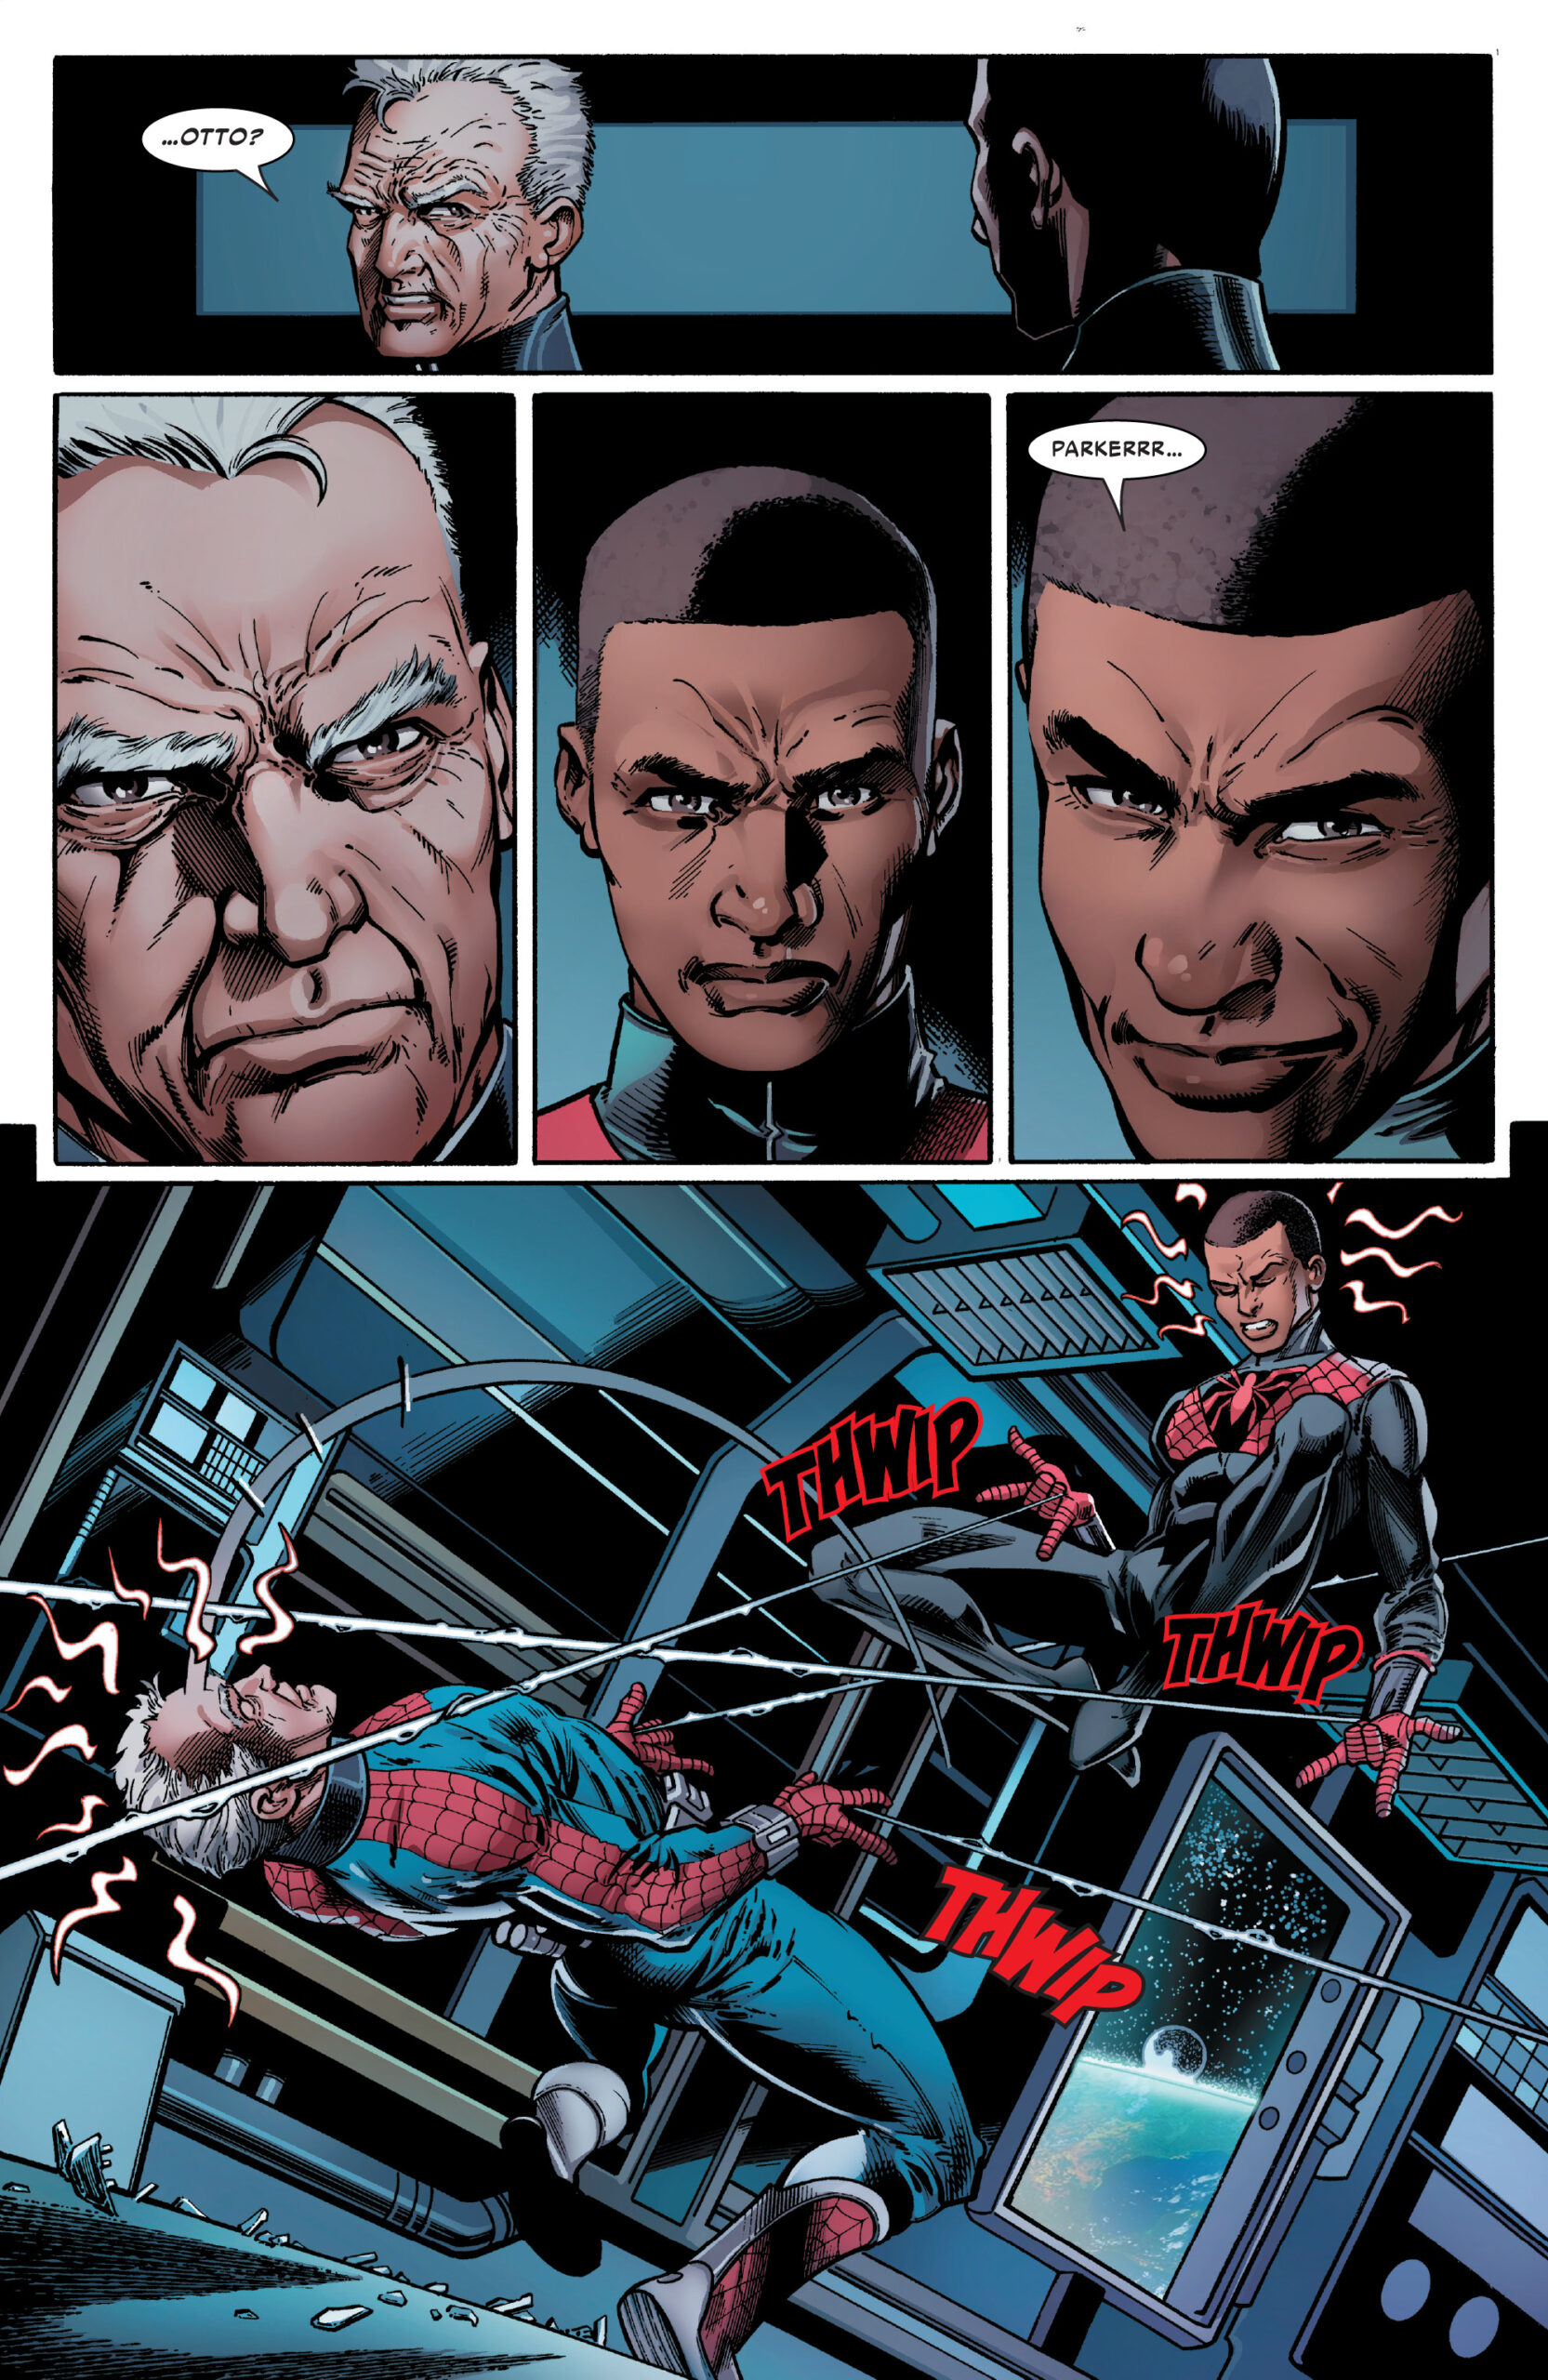 Peter Parker makes a discovery about Miles Morales in Spider-Man: Life Story Vol. 1 $6 "All My Enemies" (2019), Marvel Comics. Words by Chip Zdarsky, art by Mark Bagley, Andrew Hennessy, Frank D'Armata, and Travis Lanham.